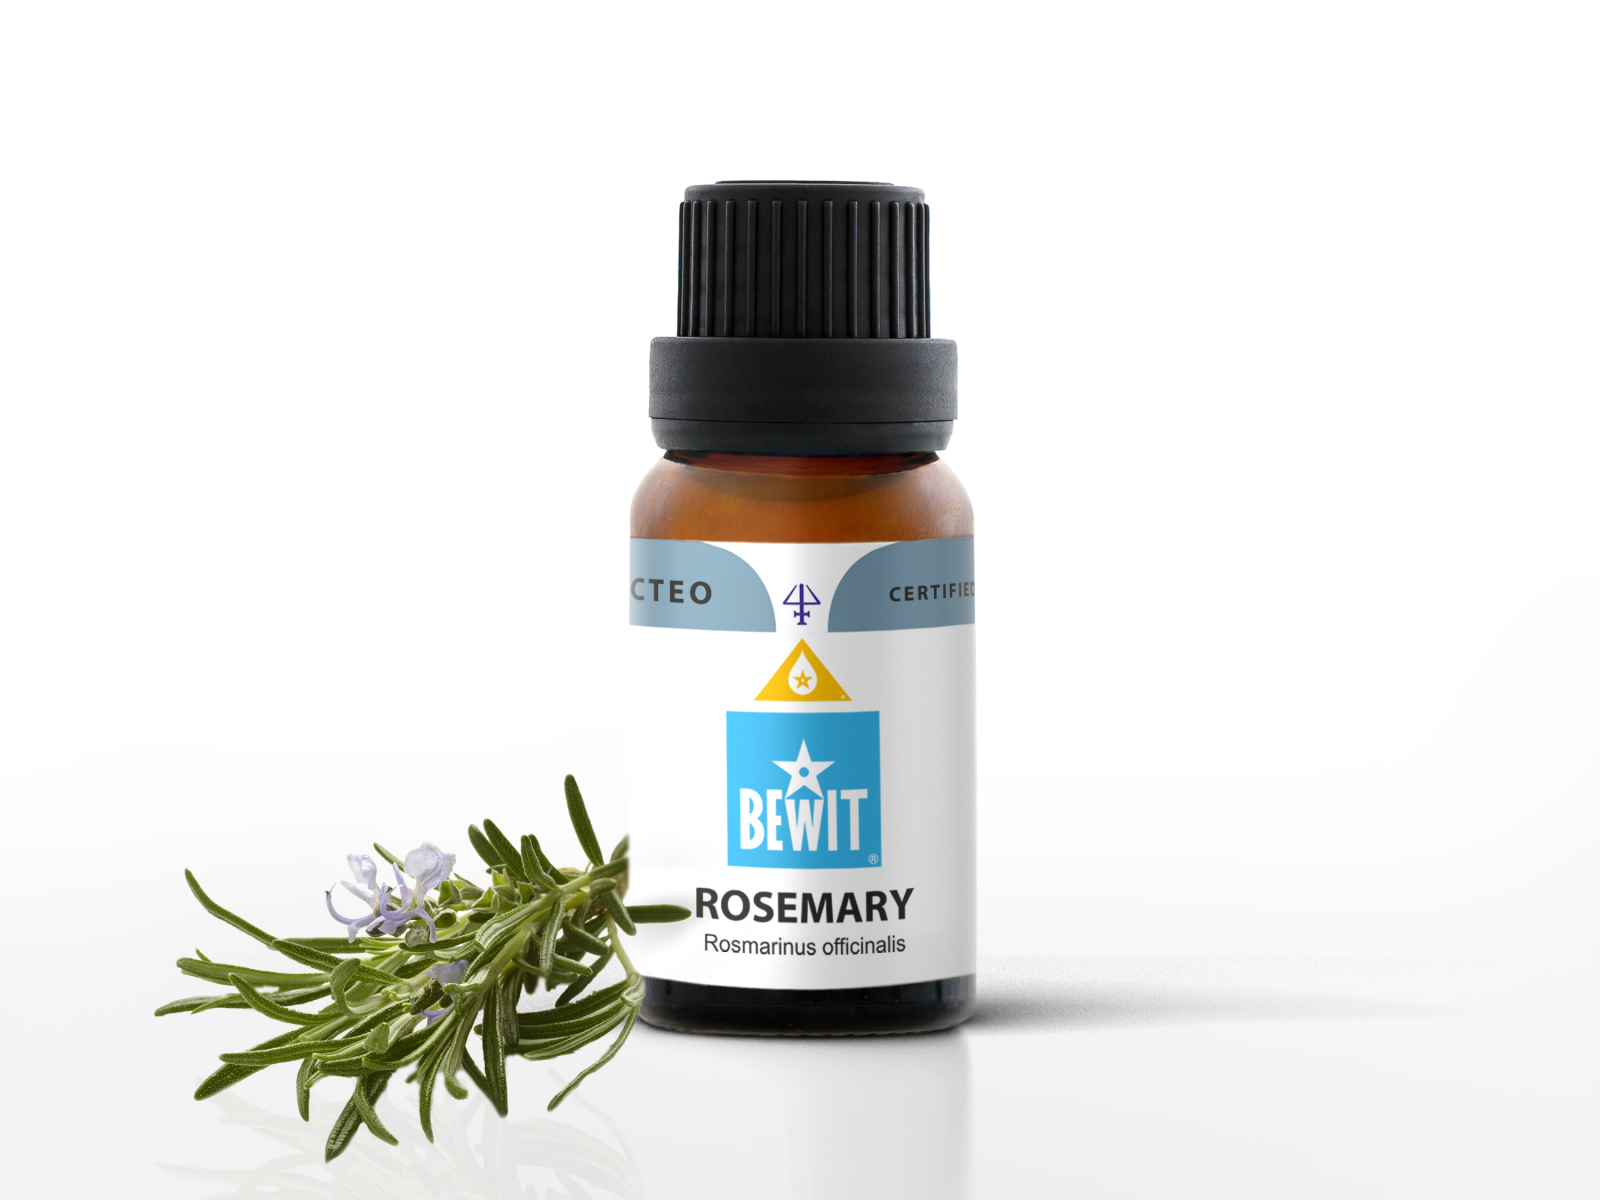 BEWIT Rosemary RAW, CO₂ - 100% pure essential oil - 1